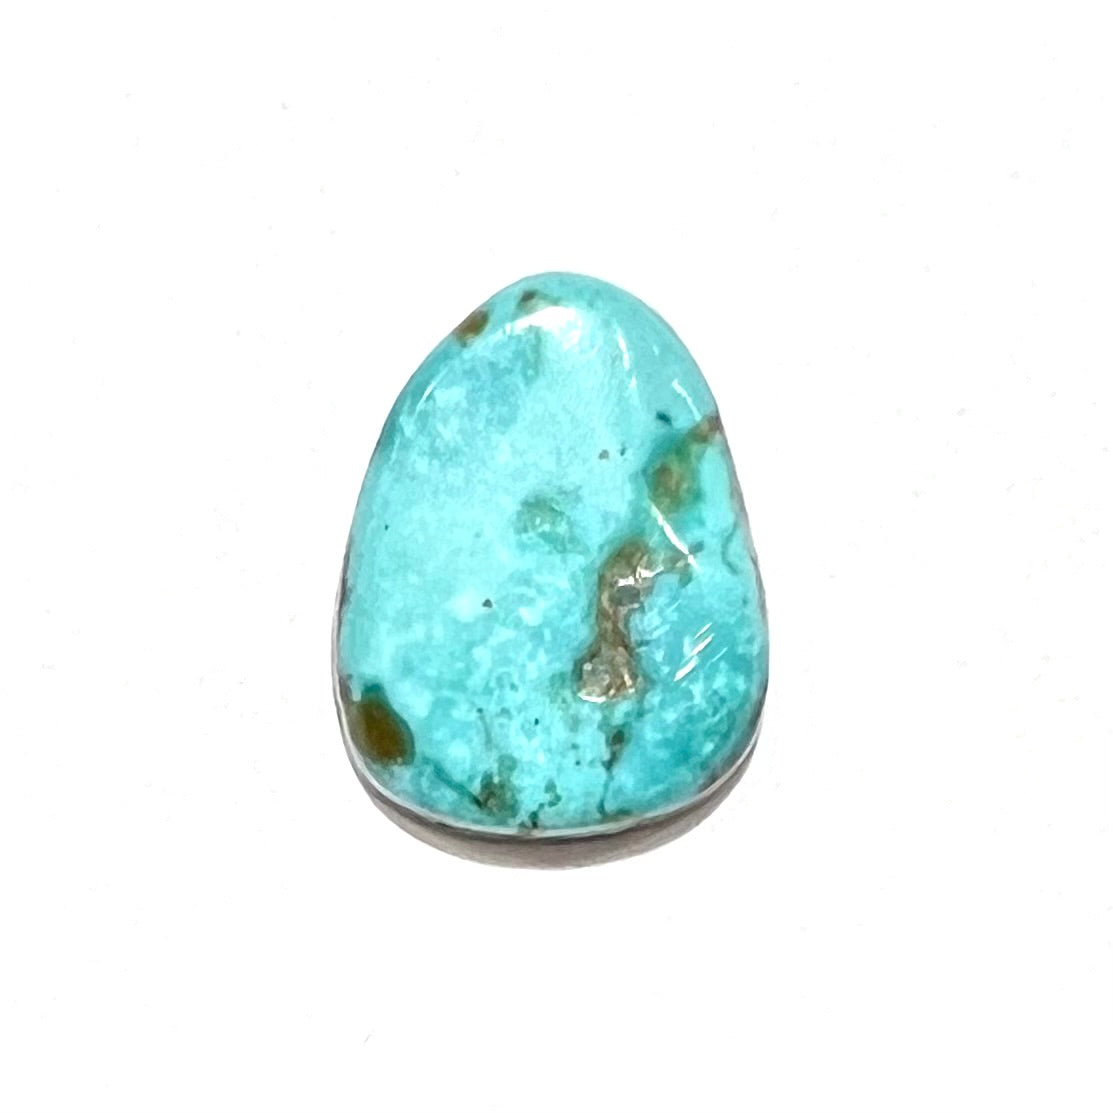 A loose, freeform pear shaped turquoise cabochon.  The stone is from the Pilot Mountain Mine in Nevada.